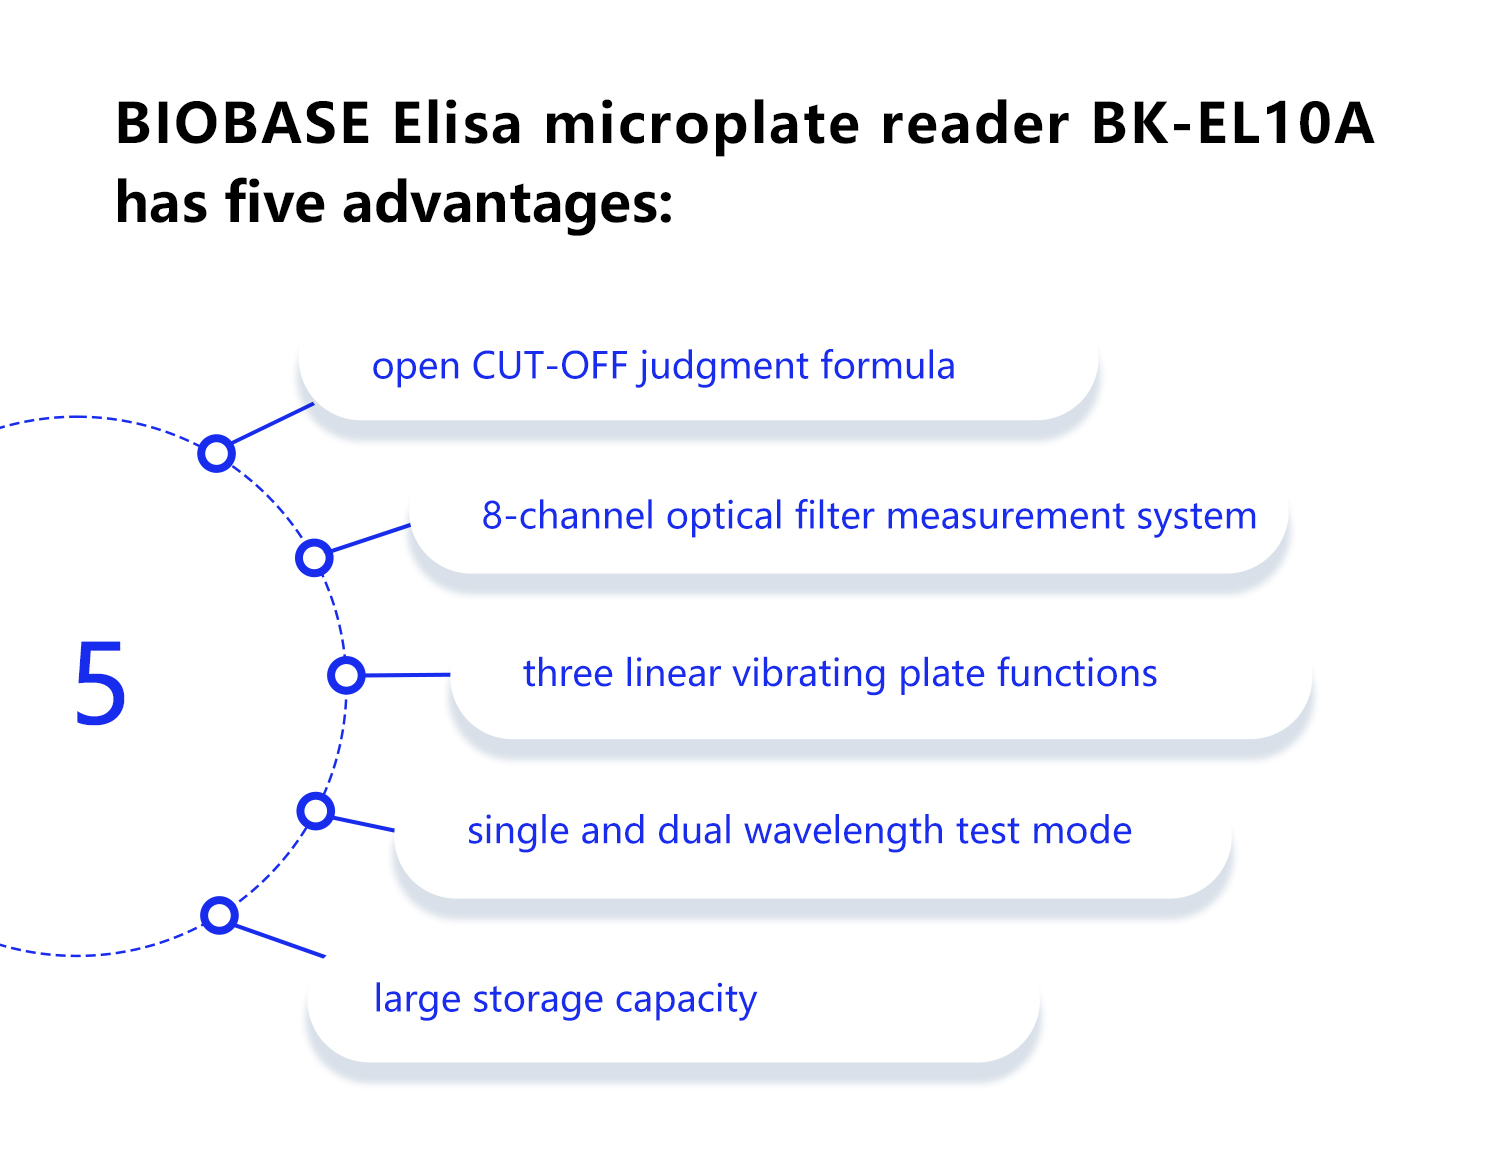 An important "メンバー" of BIOASE biochemical products - Elisa microplate reader